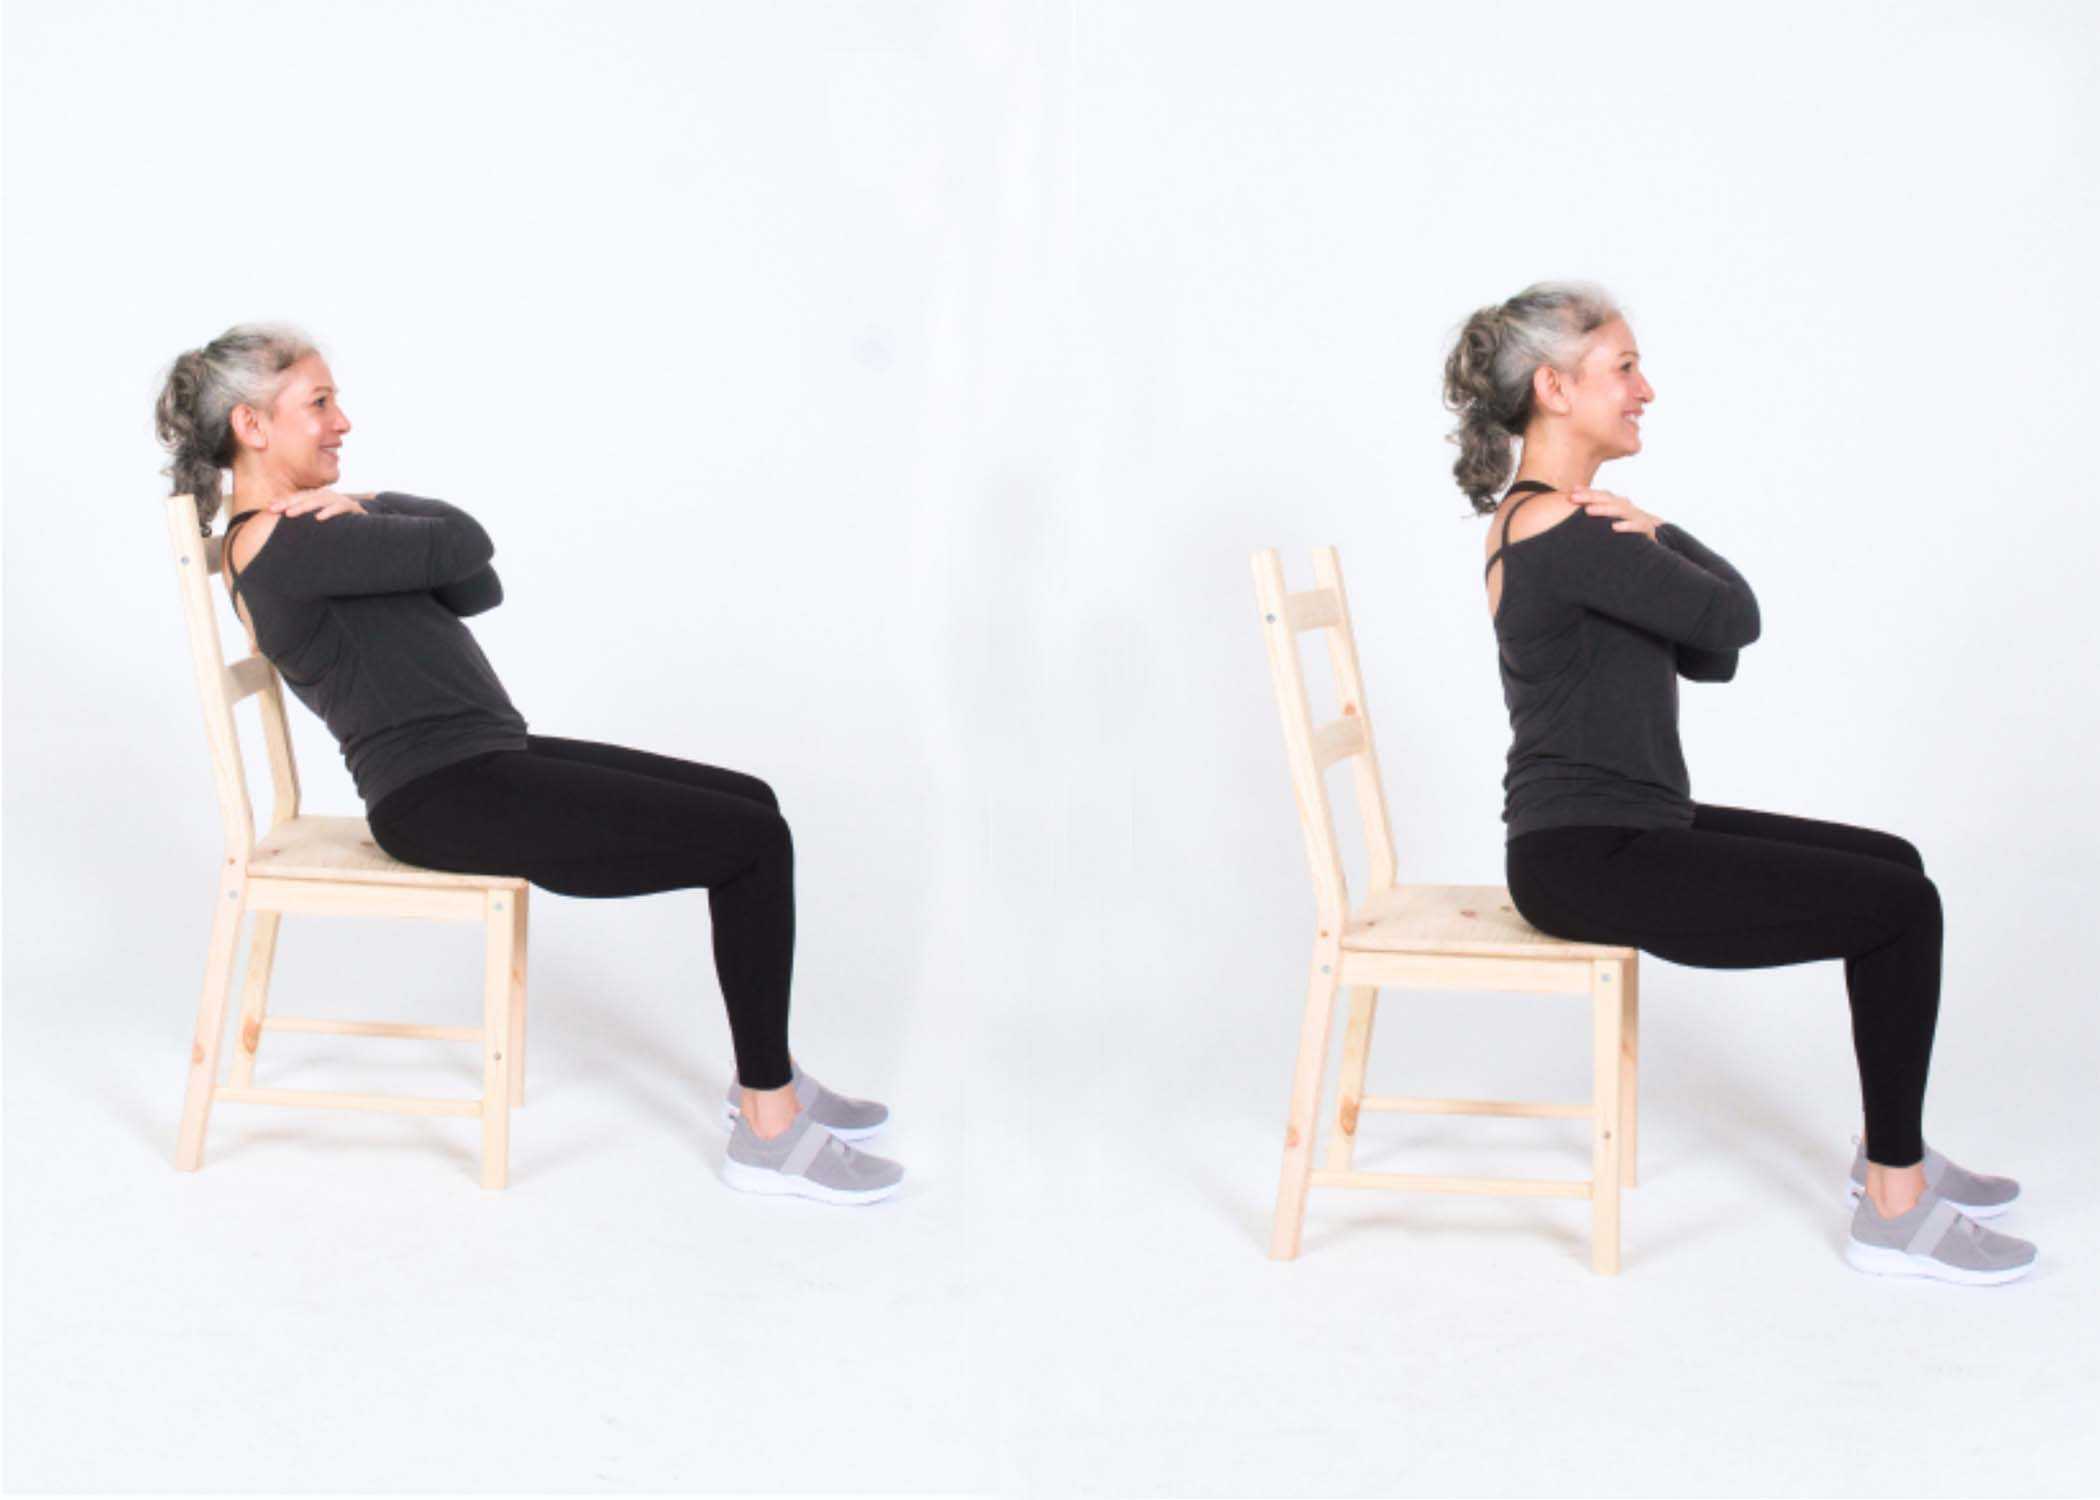 5 muscles to activate during chair workouts – Age Bold